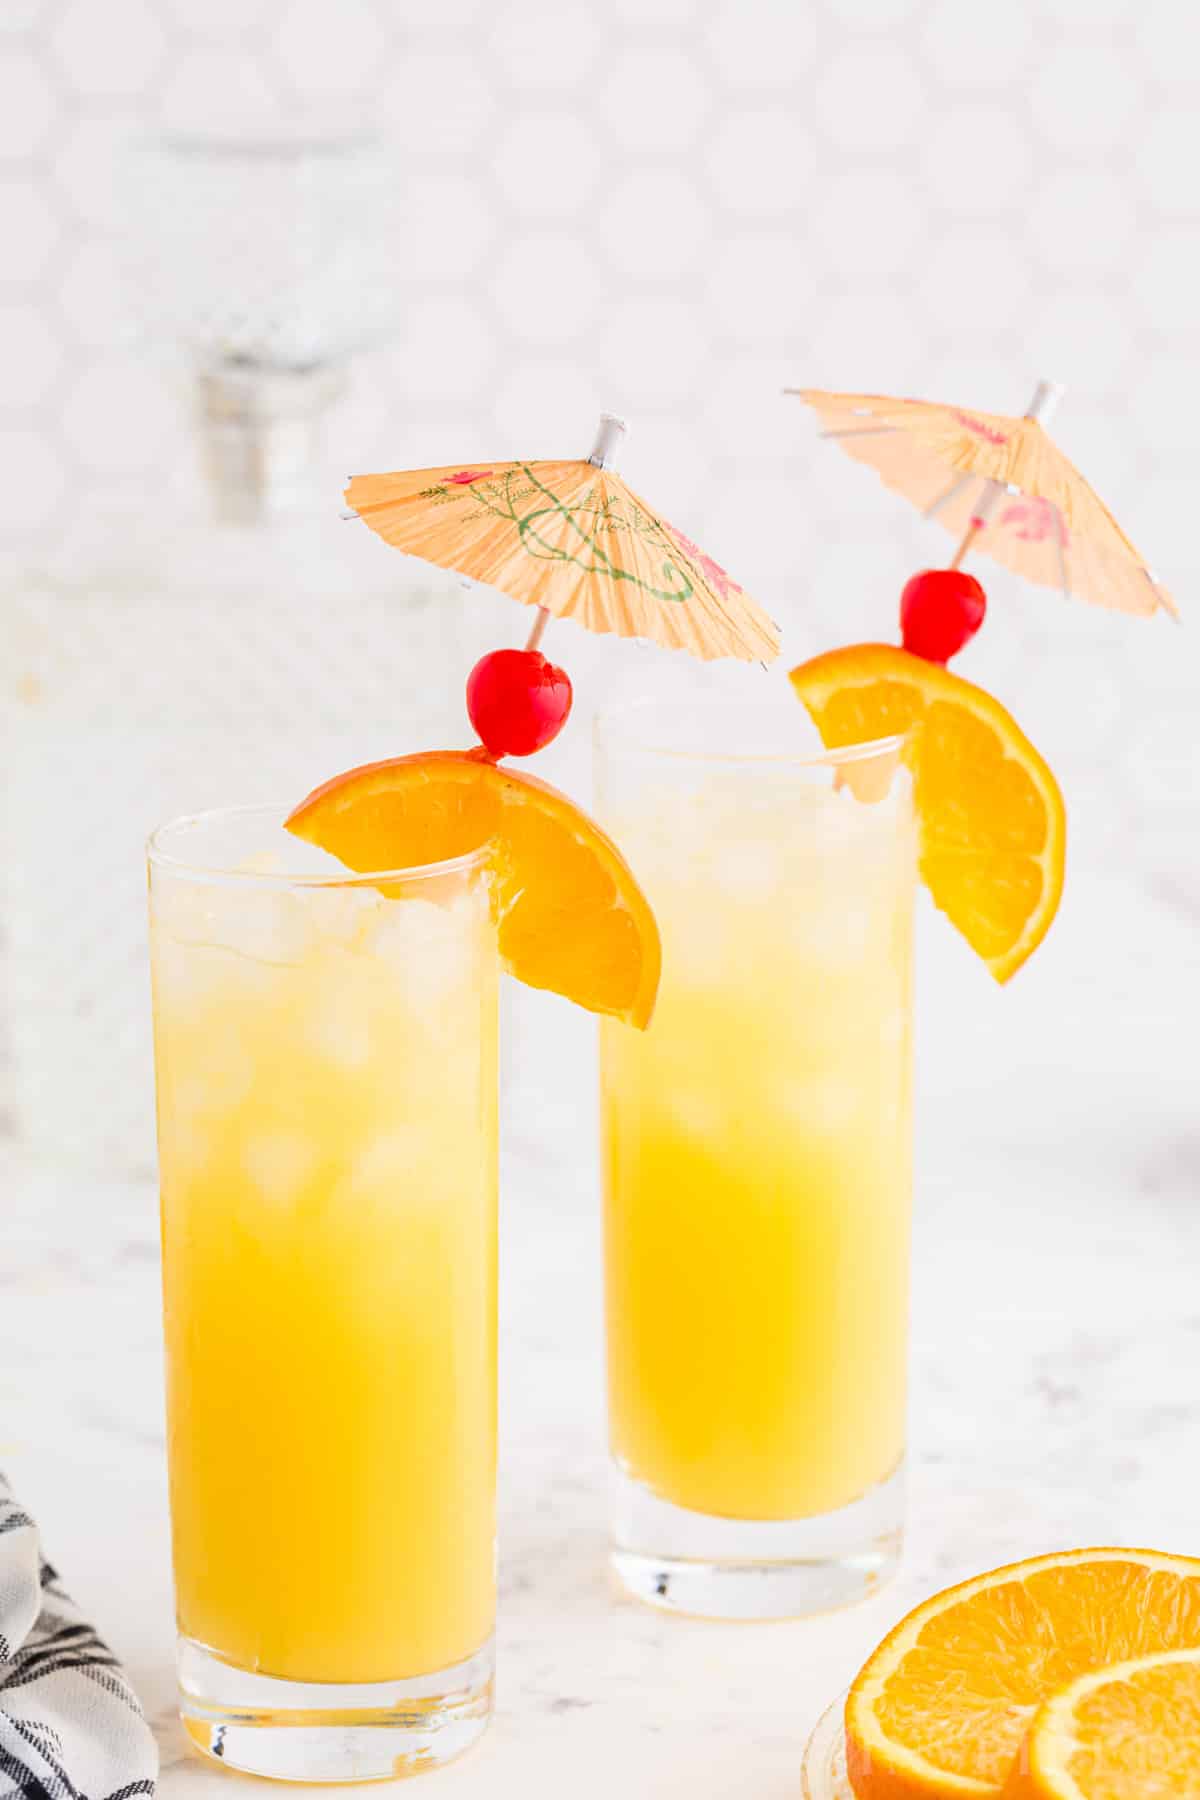 Two glasses of screwdriver drink, garnished with orange slices and cherries.